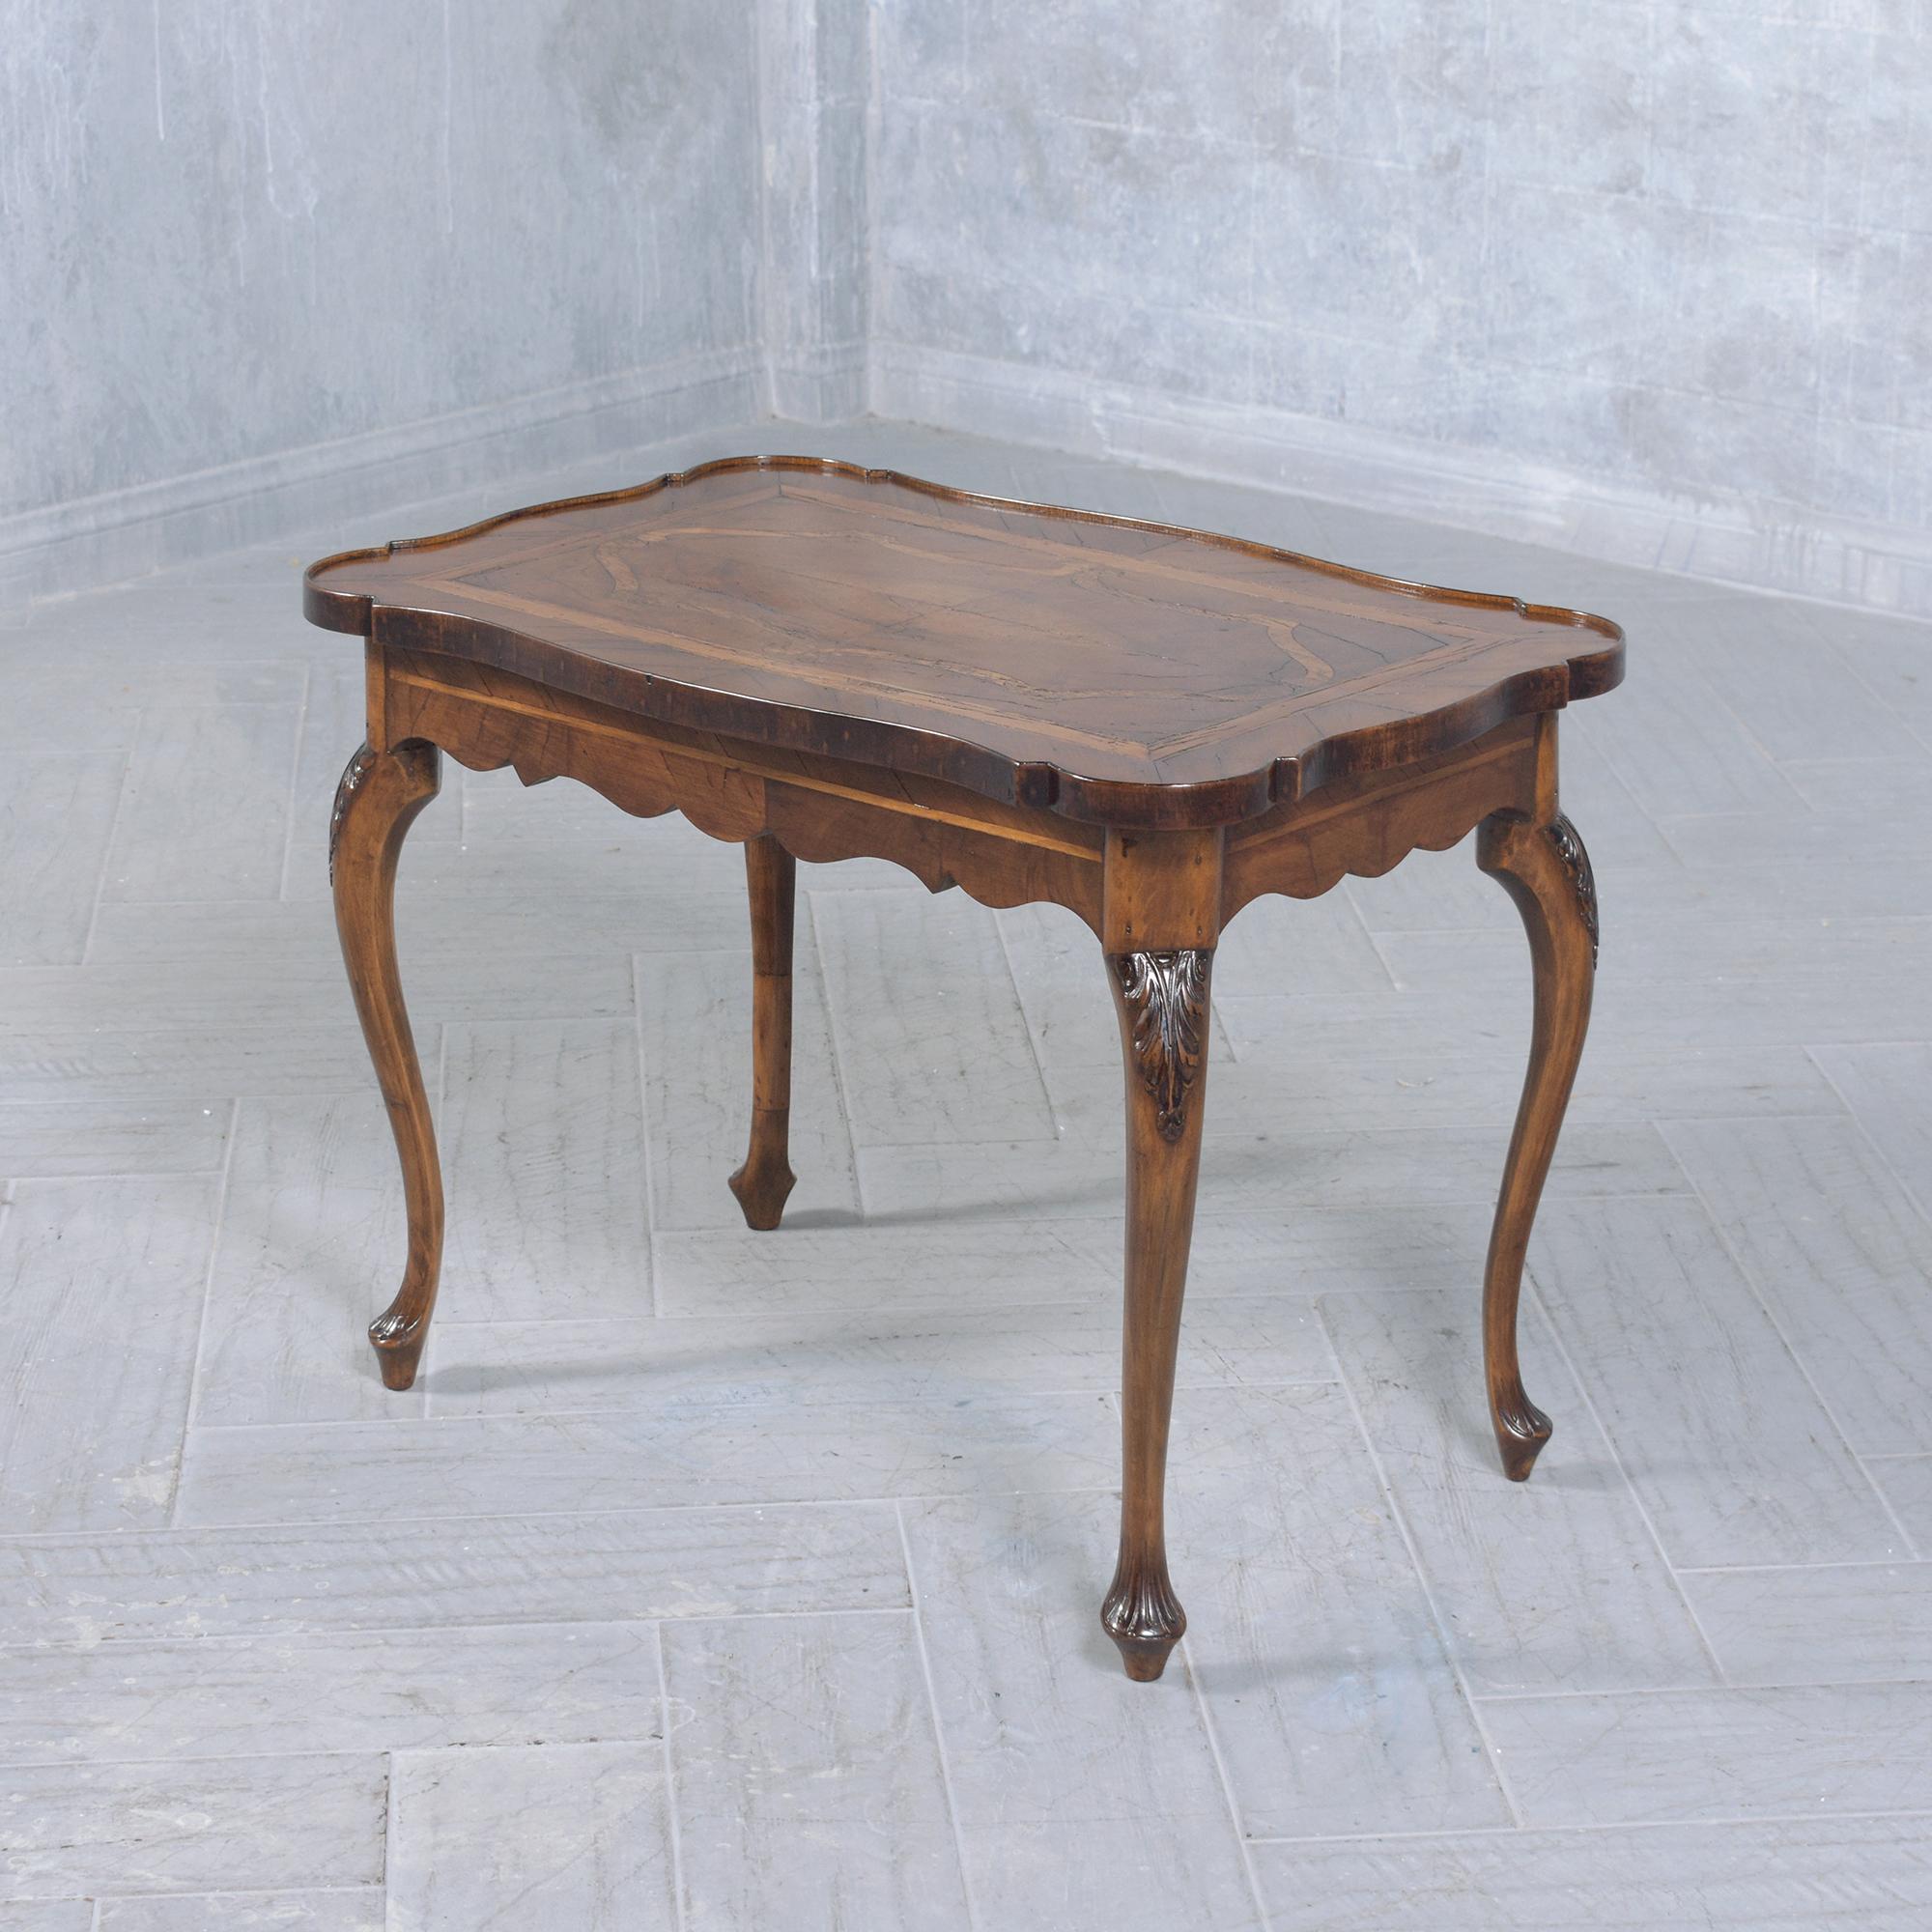 Late 19th-Century English Walnut Side Table with Inlaid Pattern For Sale 2